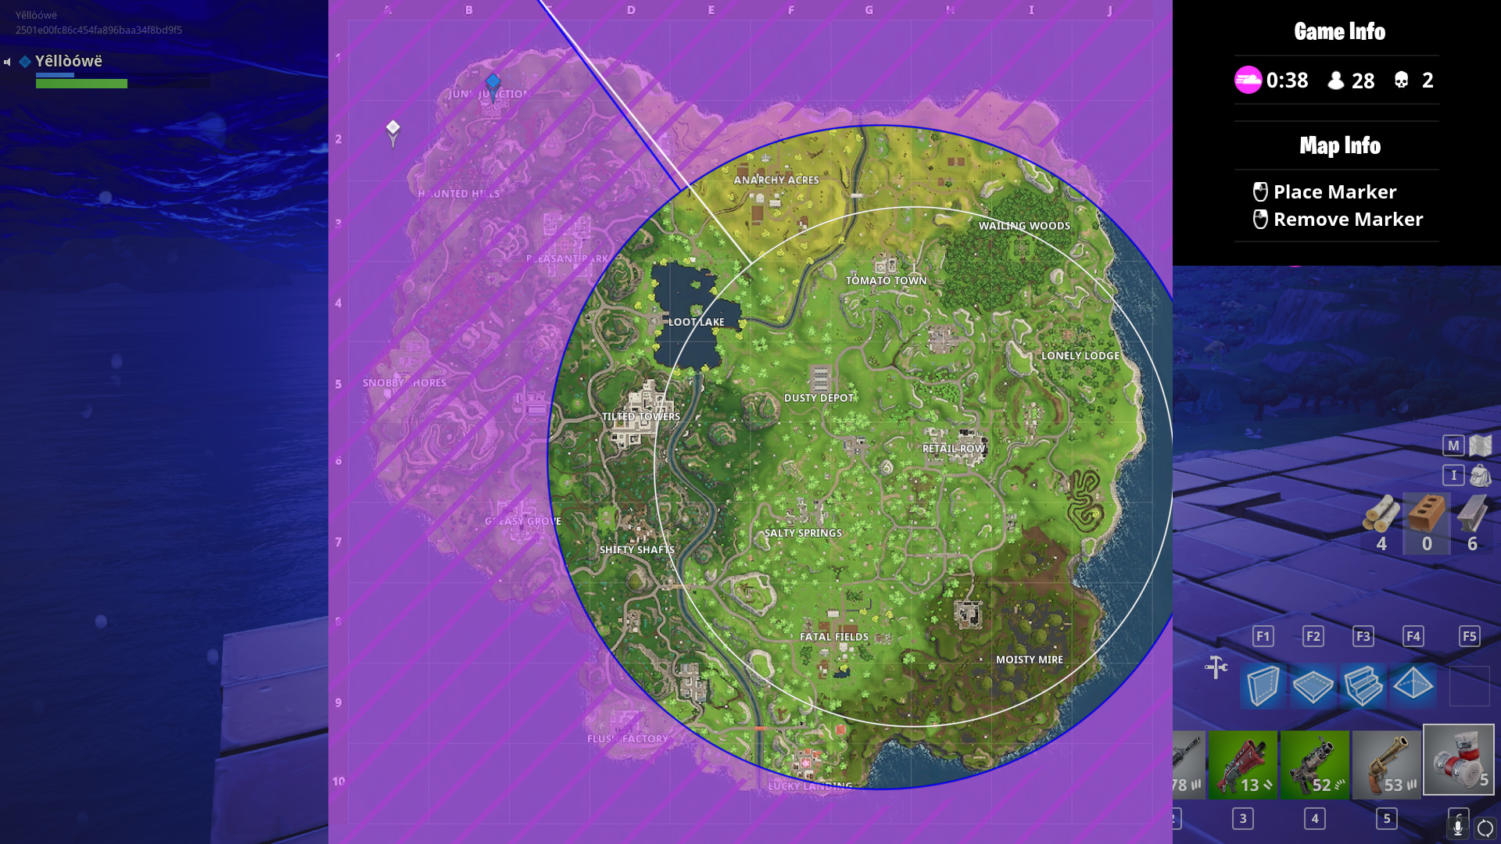 google images the blue circle represents the boundary of the storm the purple shaded area is the storm and the white circle is where the storm will be - fortnite basketball court background